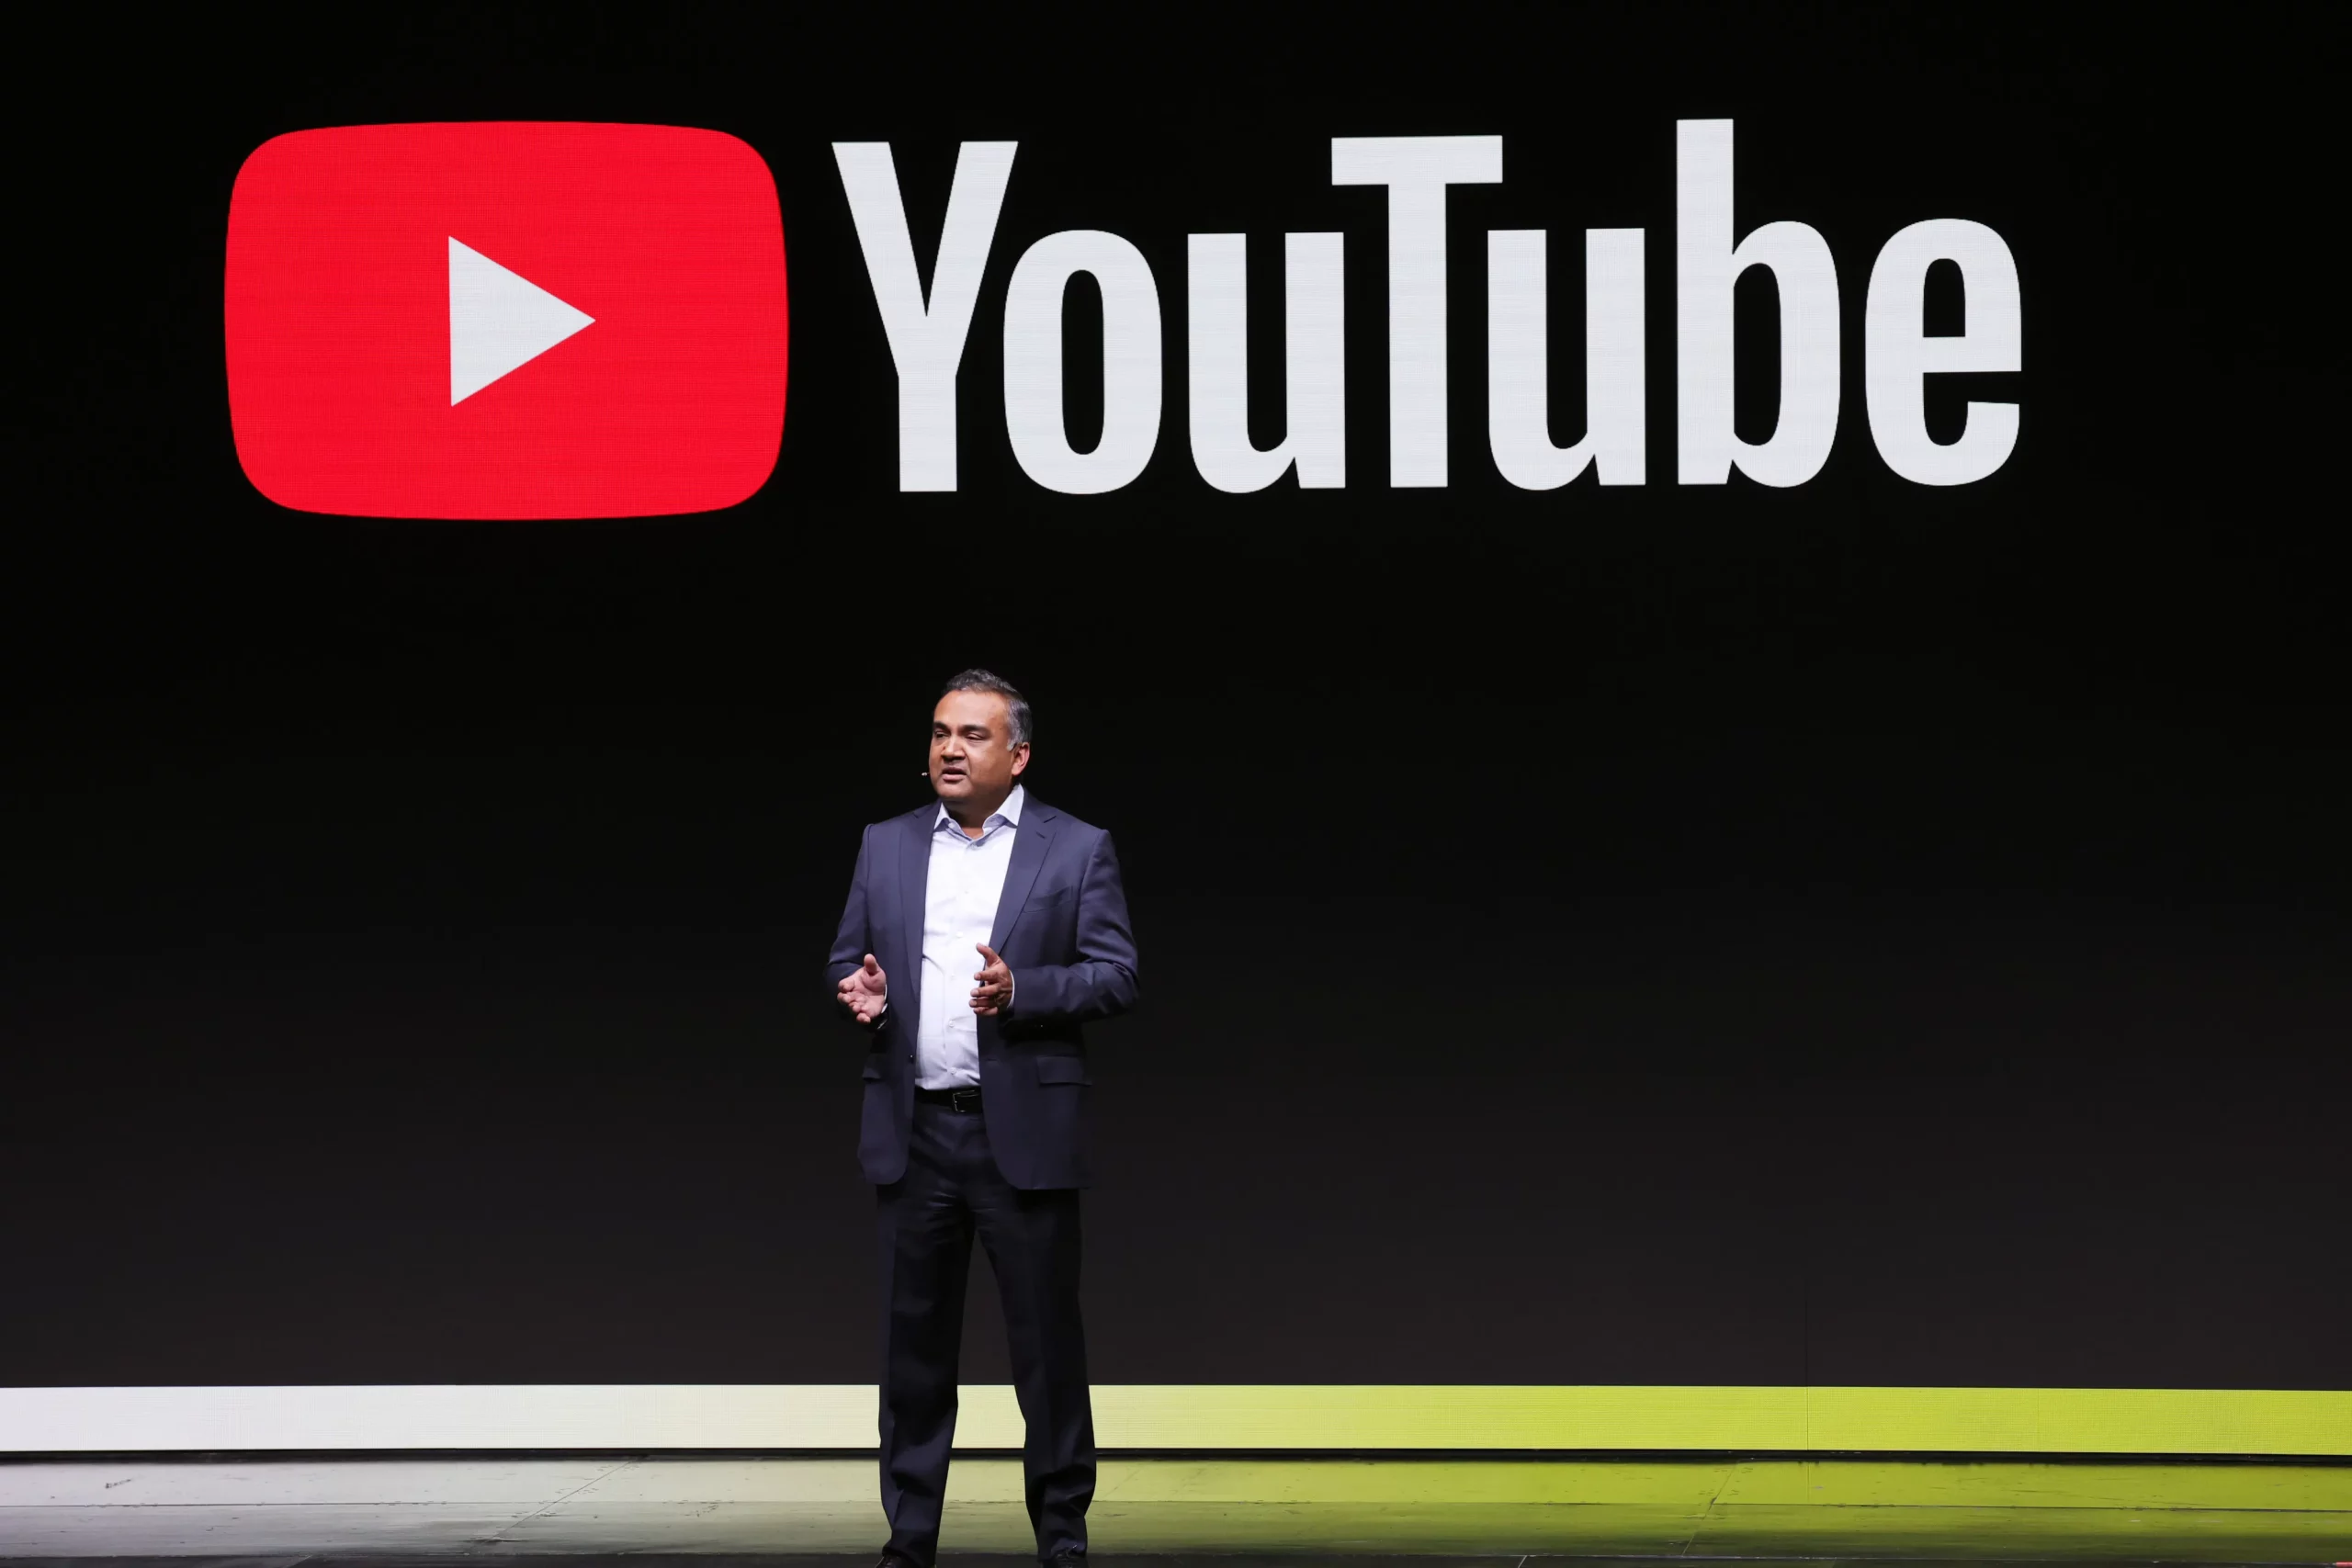 YouTube CEO Neal Mohan Clarifies Stance on AI Training with YouTube Content